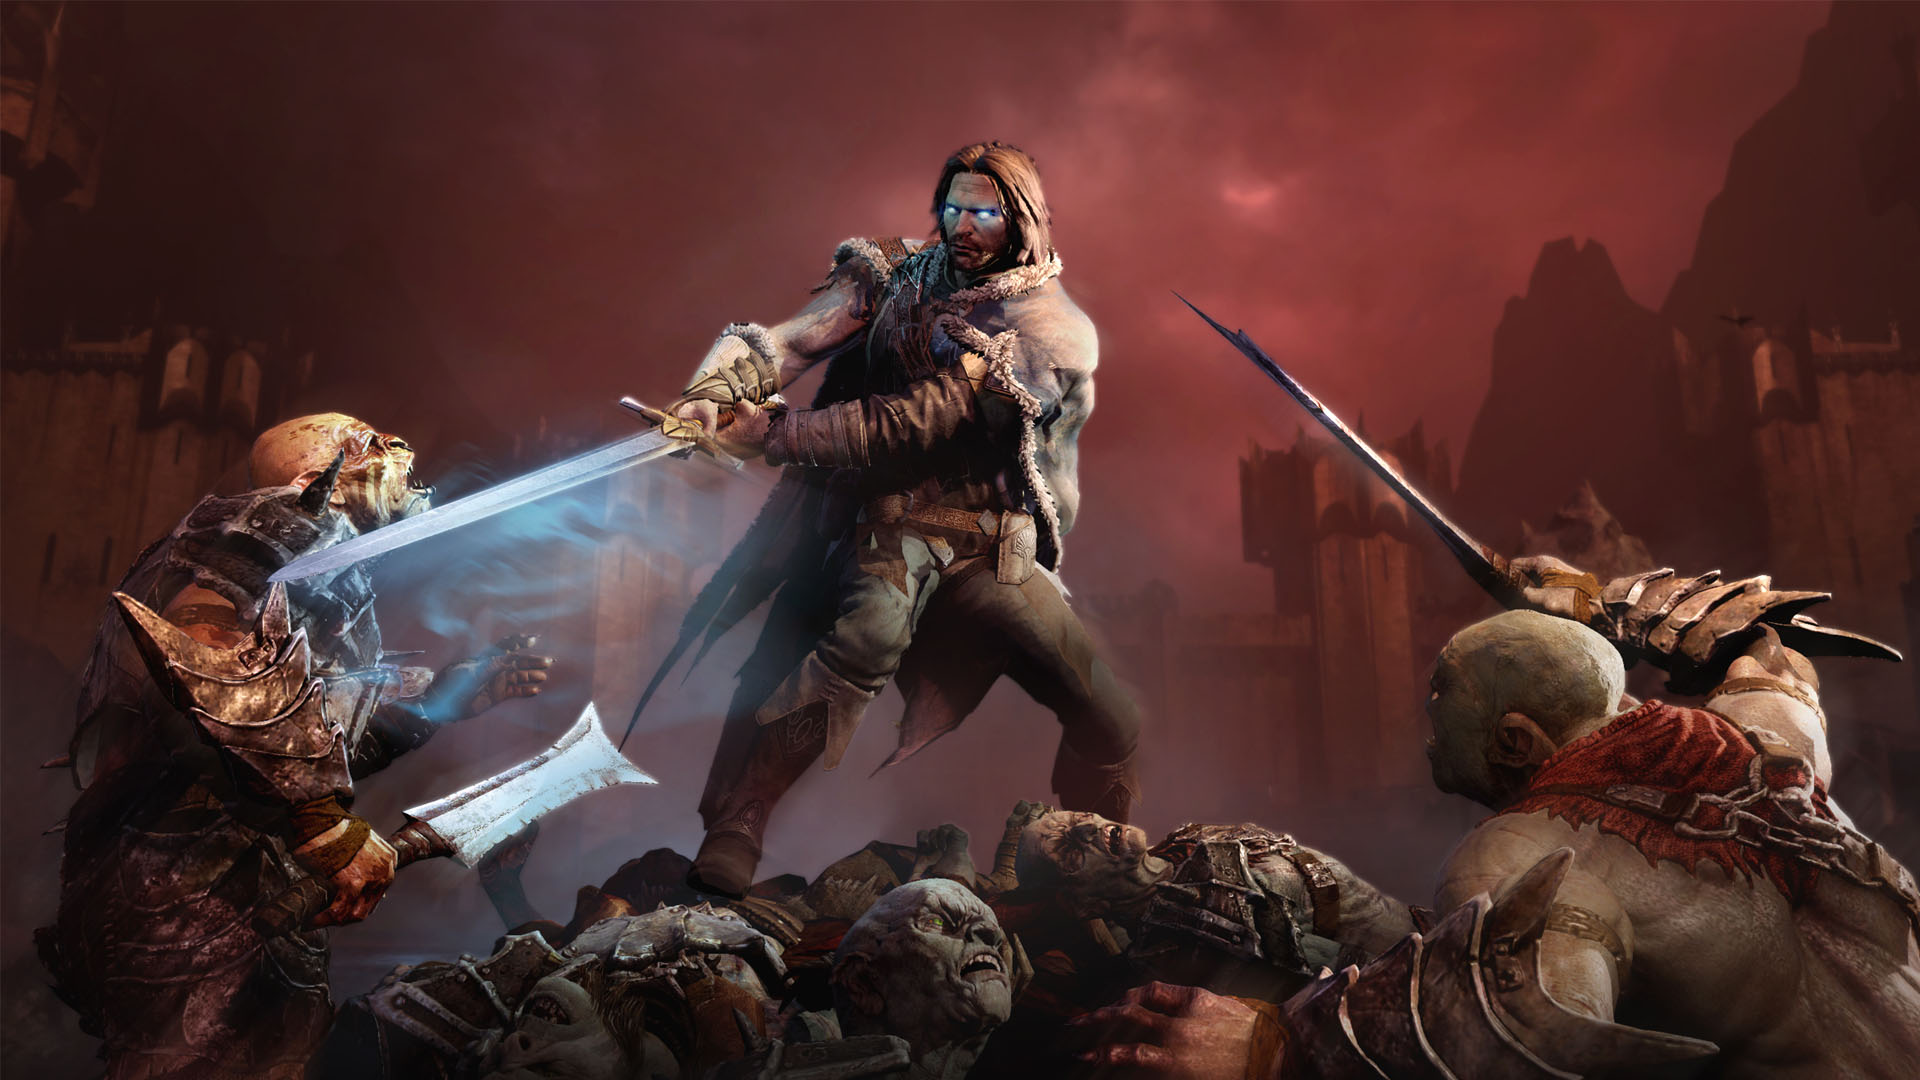 Middle-Earth: Shadow of Mordor - Complete DLC Bundle Steam CD Key 5.64 usd